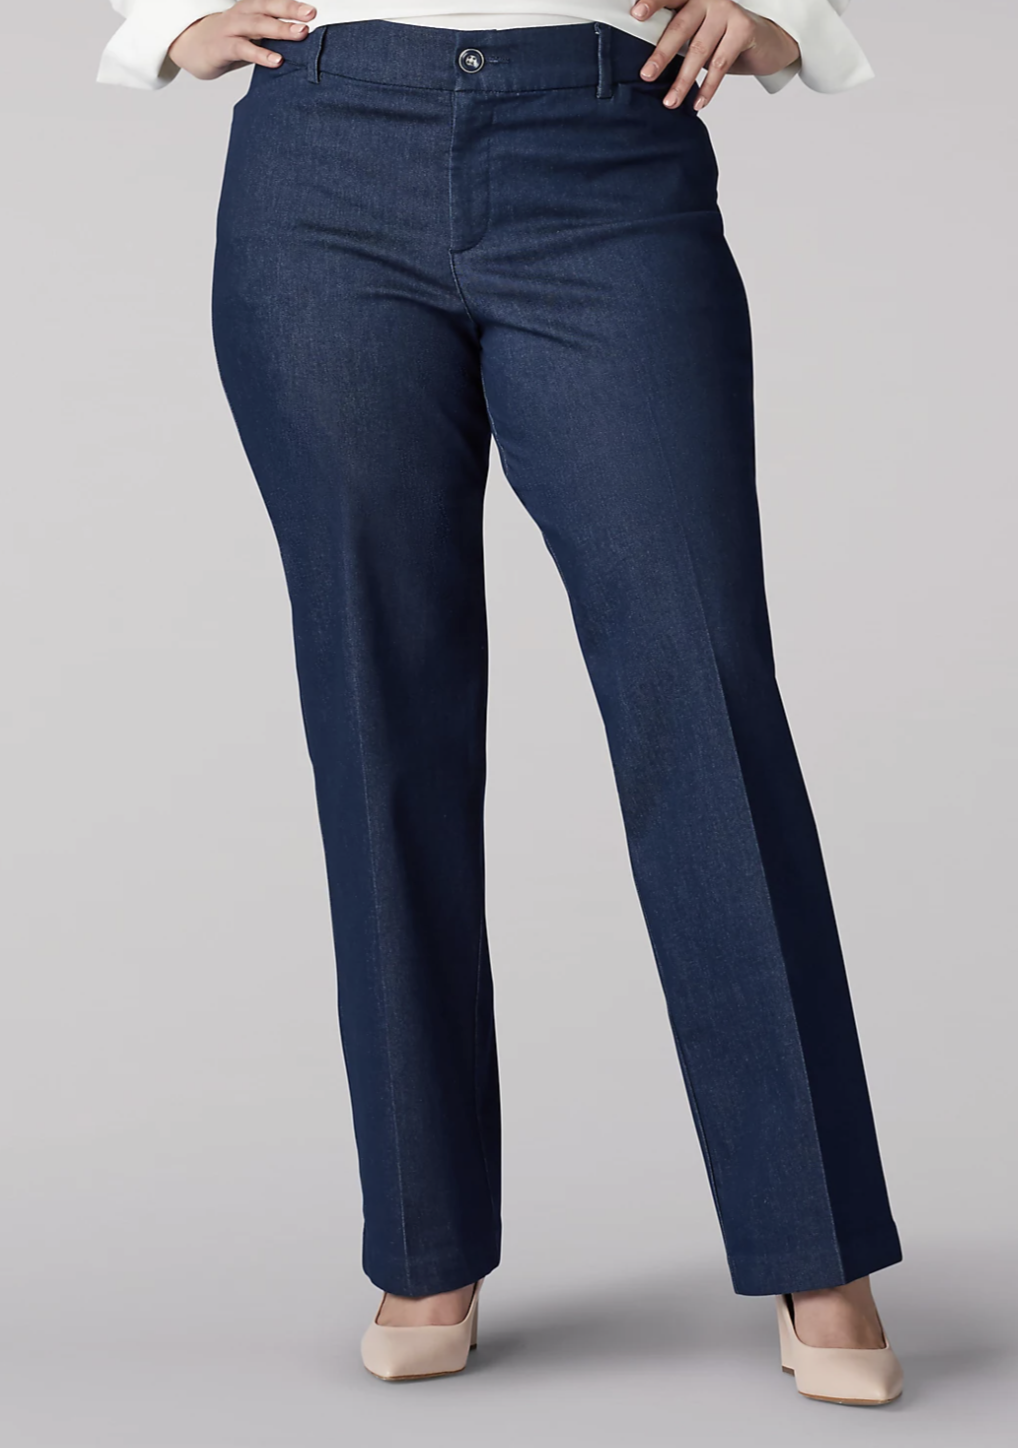 Lee Women's Ultra Lux With Flex Motion Regular Fit Trouser Pant that look like denim.